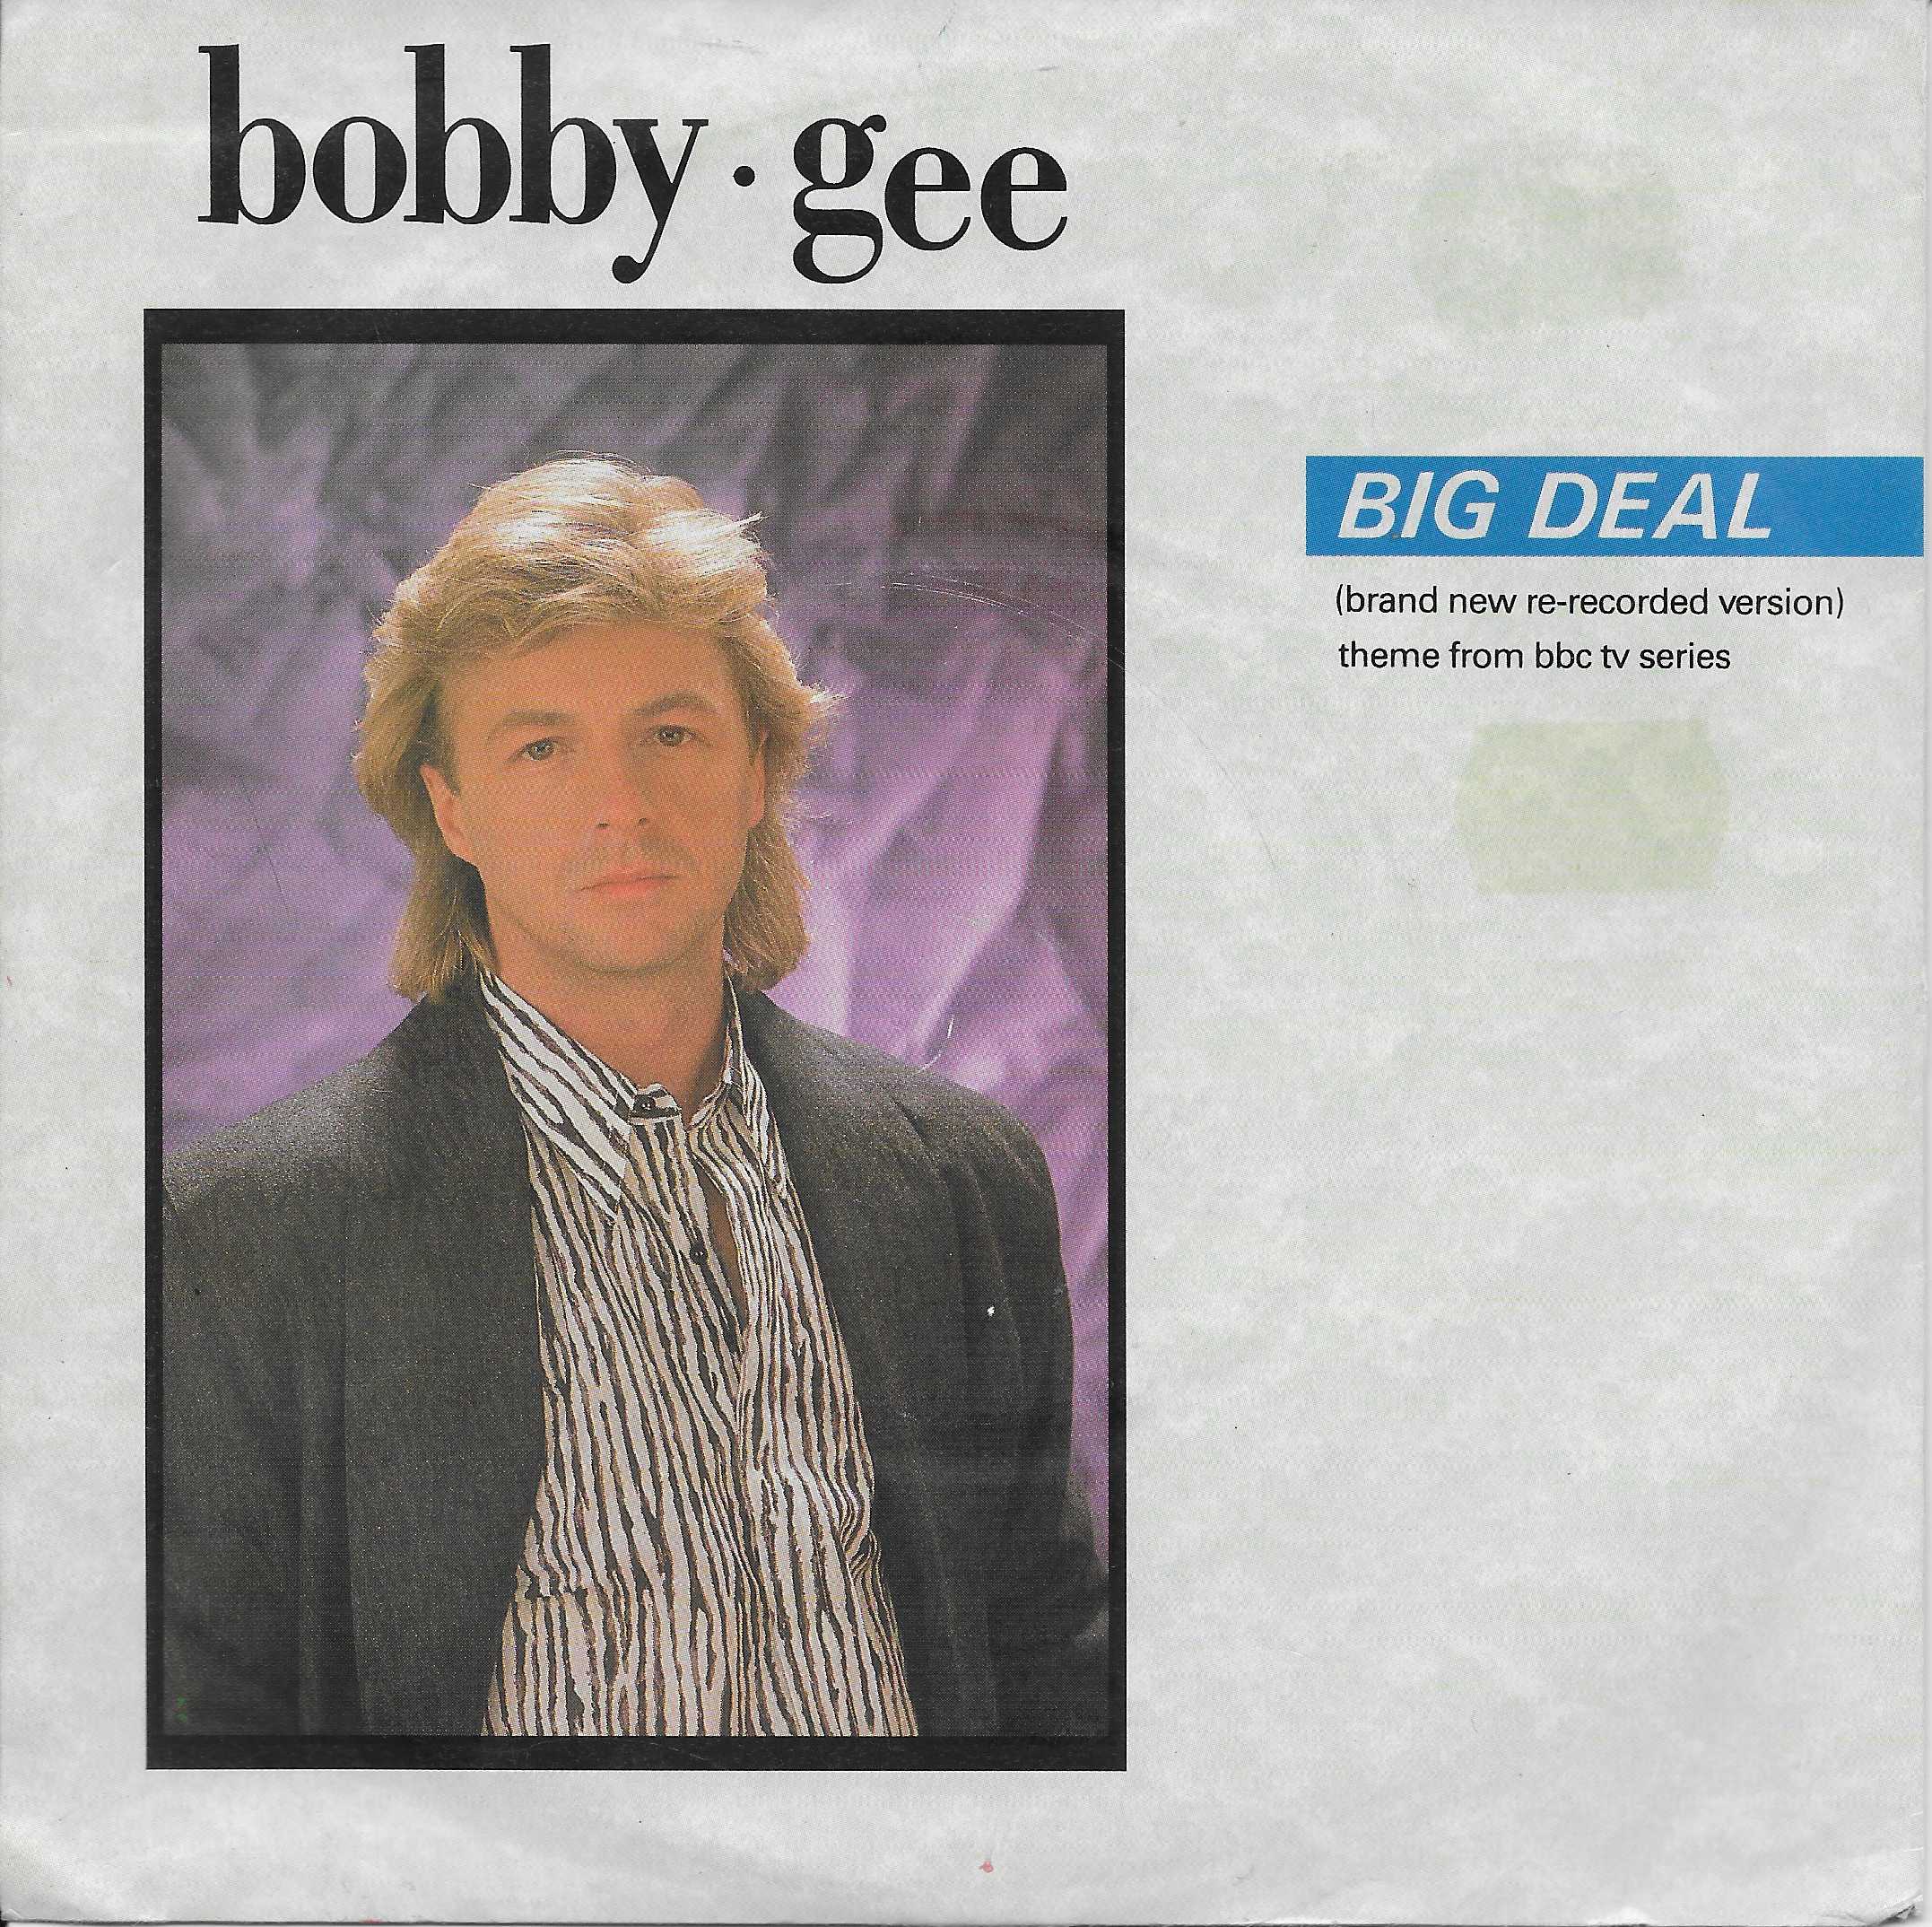 Picture of Big deal by artist Bobby Gee from the BBC singles - Records and Tapes library